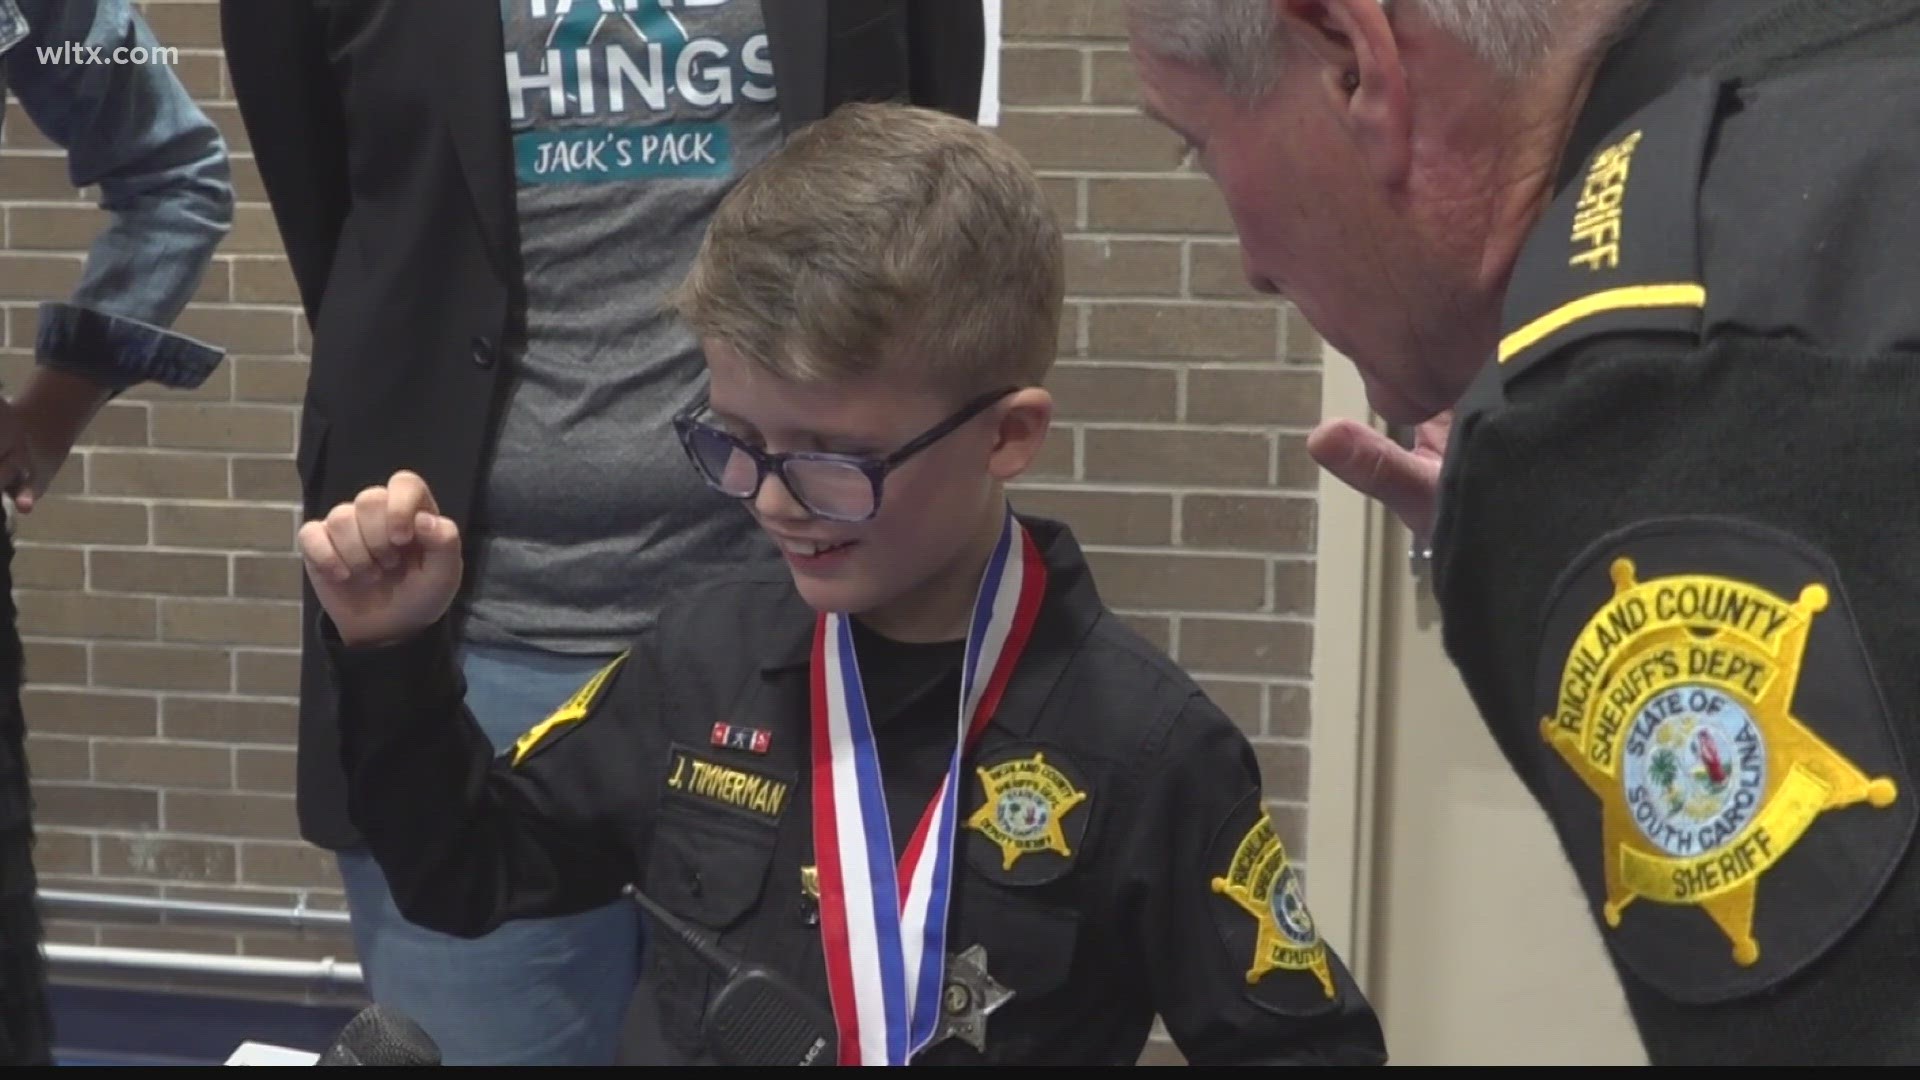 Jack Timmerman, 7, is the newest and youngest Richland County Sheriff's Deputy.